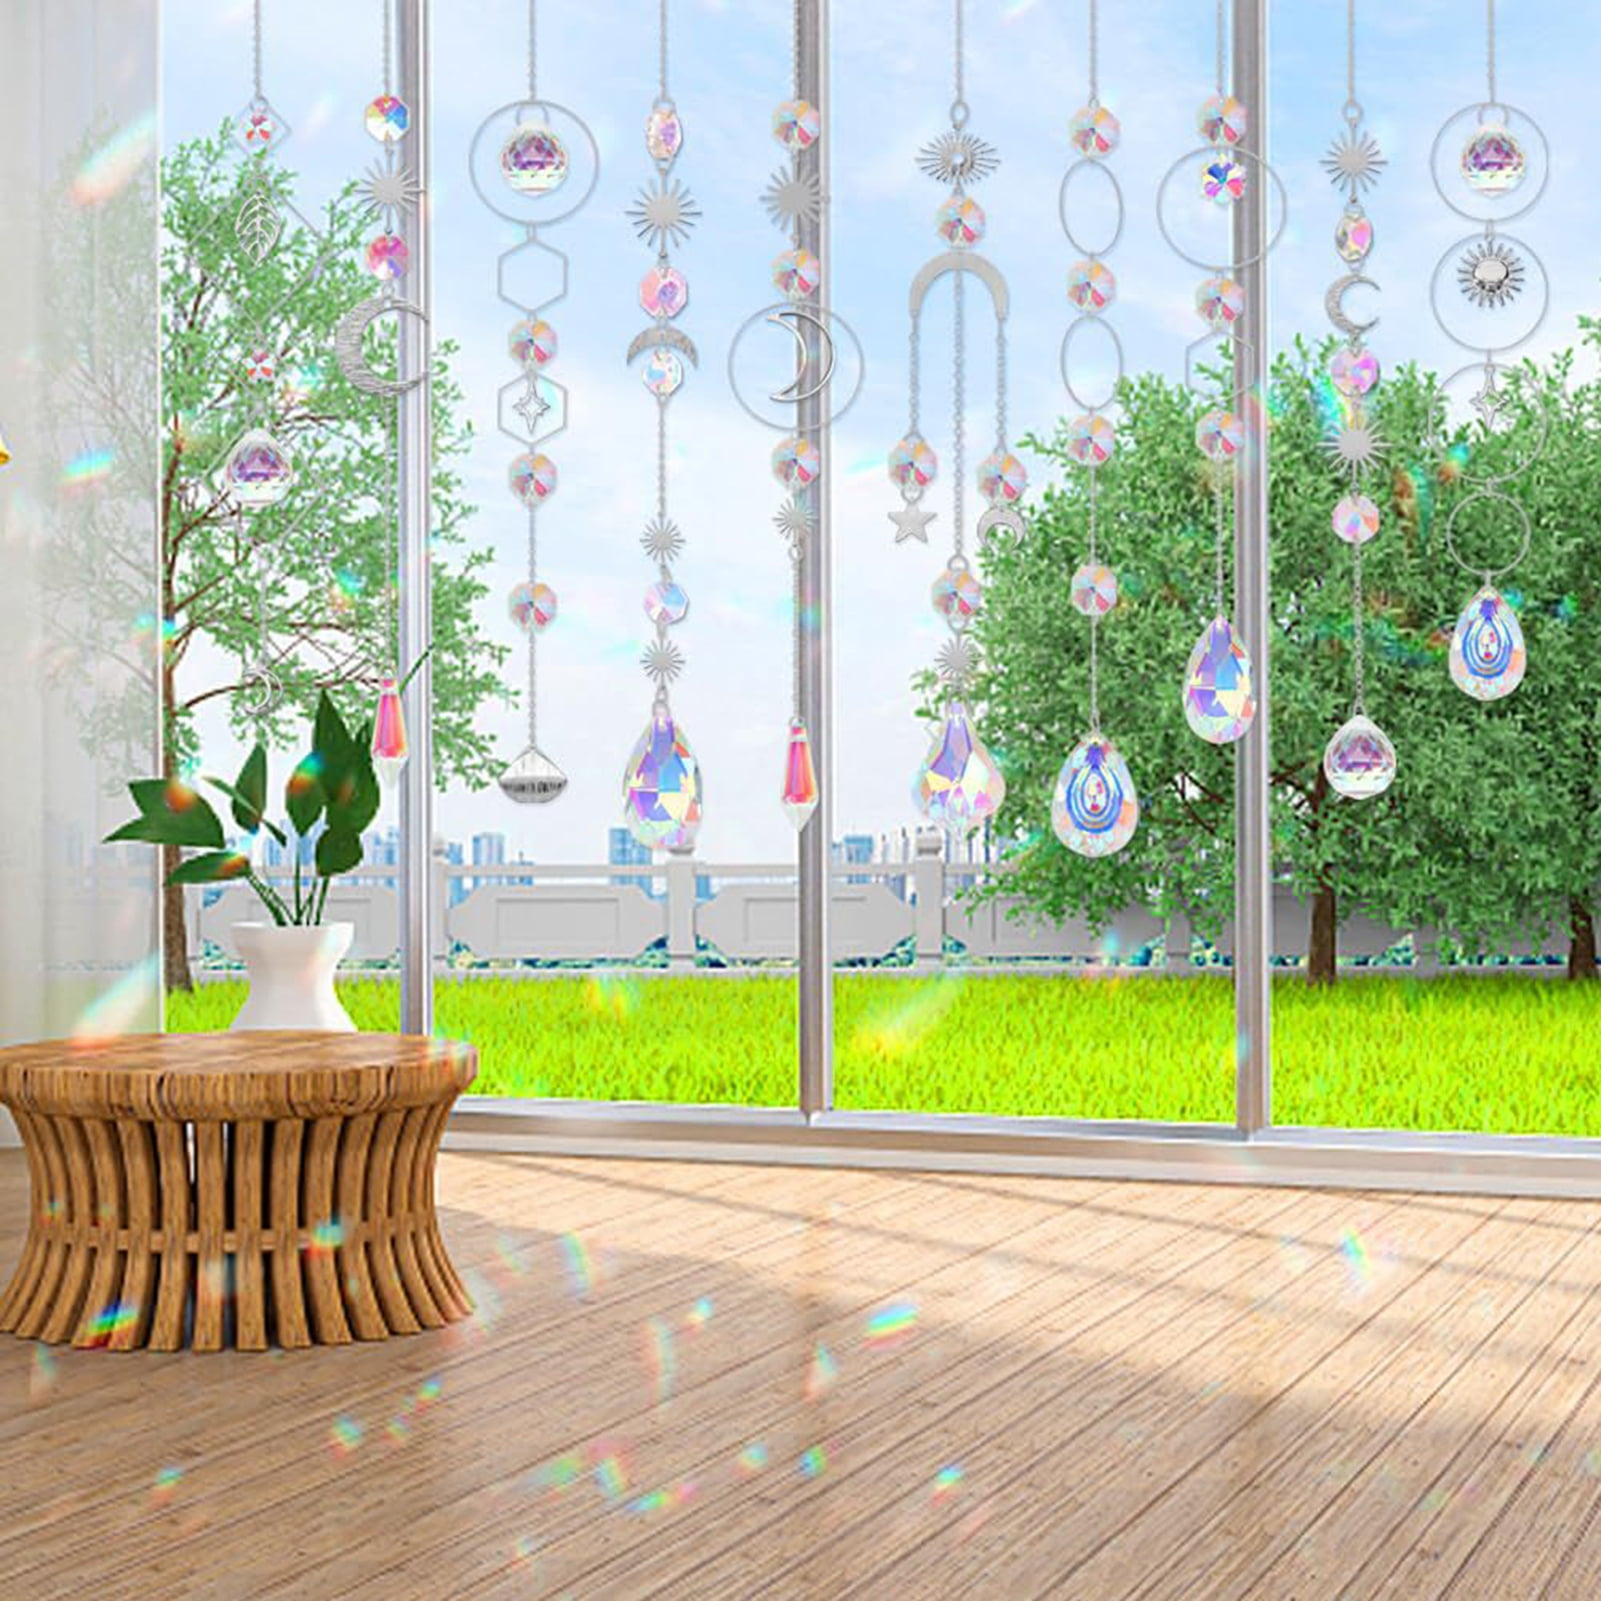 Sratte 48 Pcs Sun Catcher Kits for Art Window DIY Suncatchers Craft for  Kids Window Art Suncatcher Paint with 24 Suction Cups for Kids Ornament